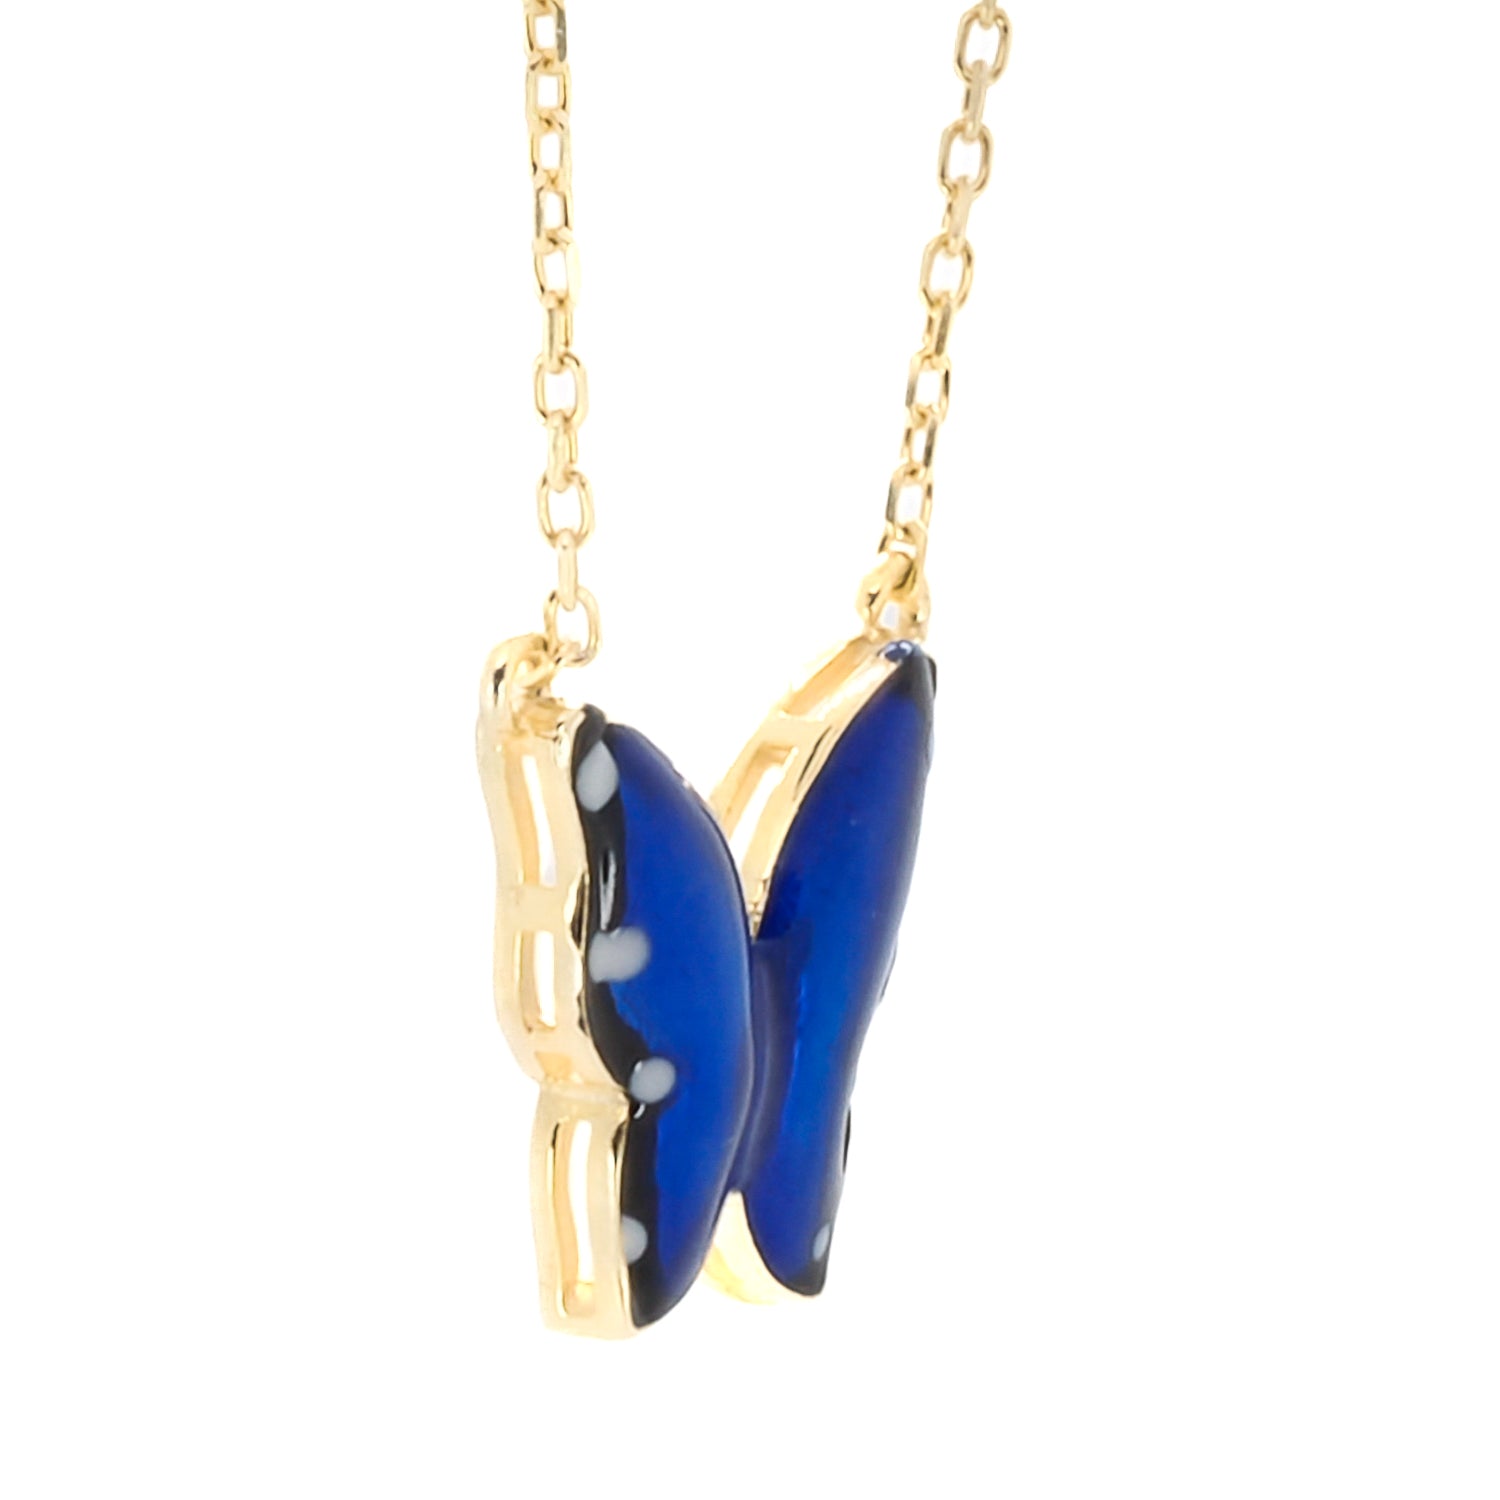 Gold Spiritual Blue Enamel Butterfly Necklace, a handmade piece of jewelry that inspires spiritual growth and self-transformation.